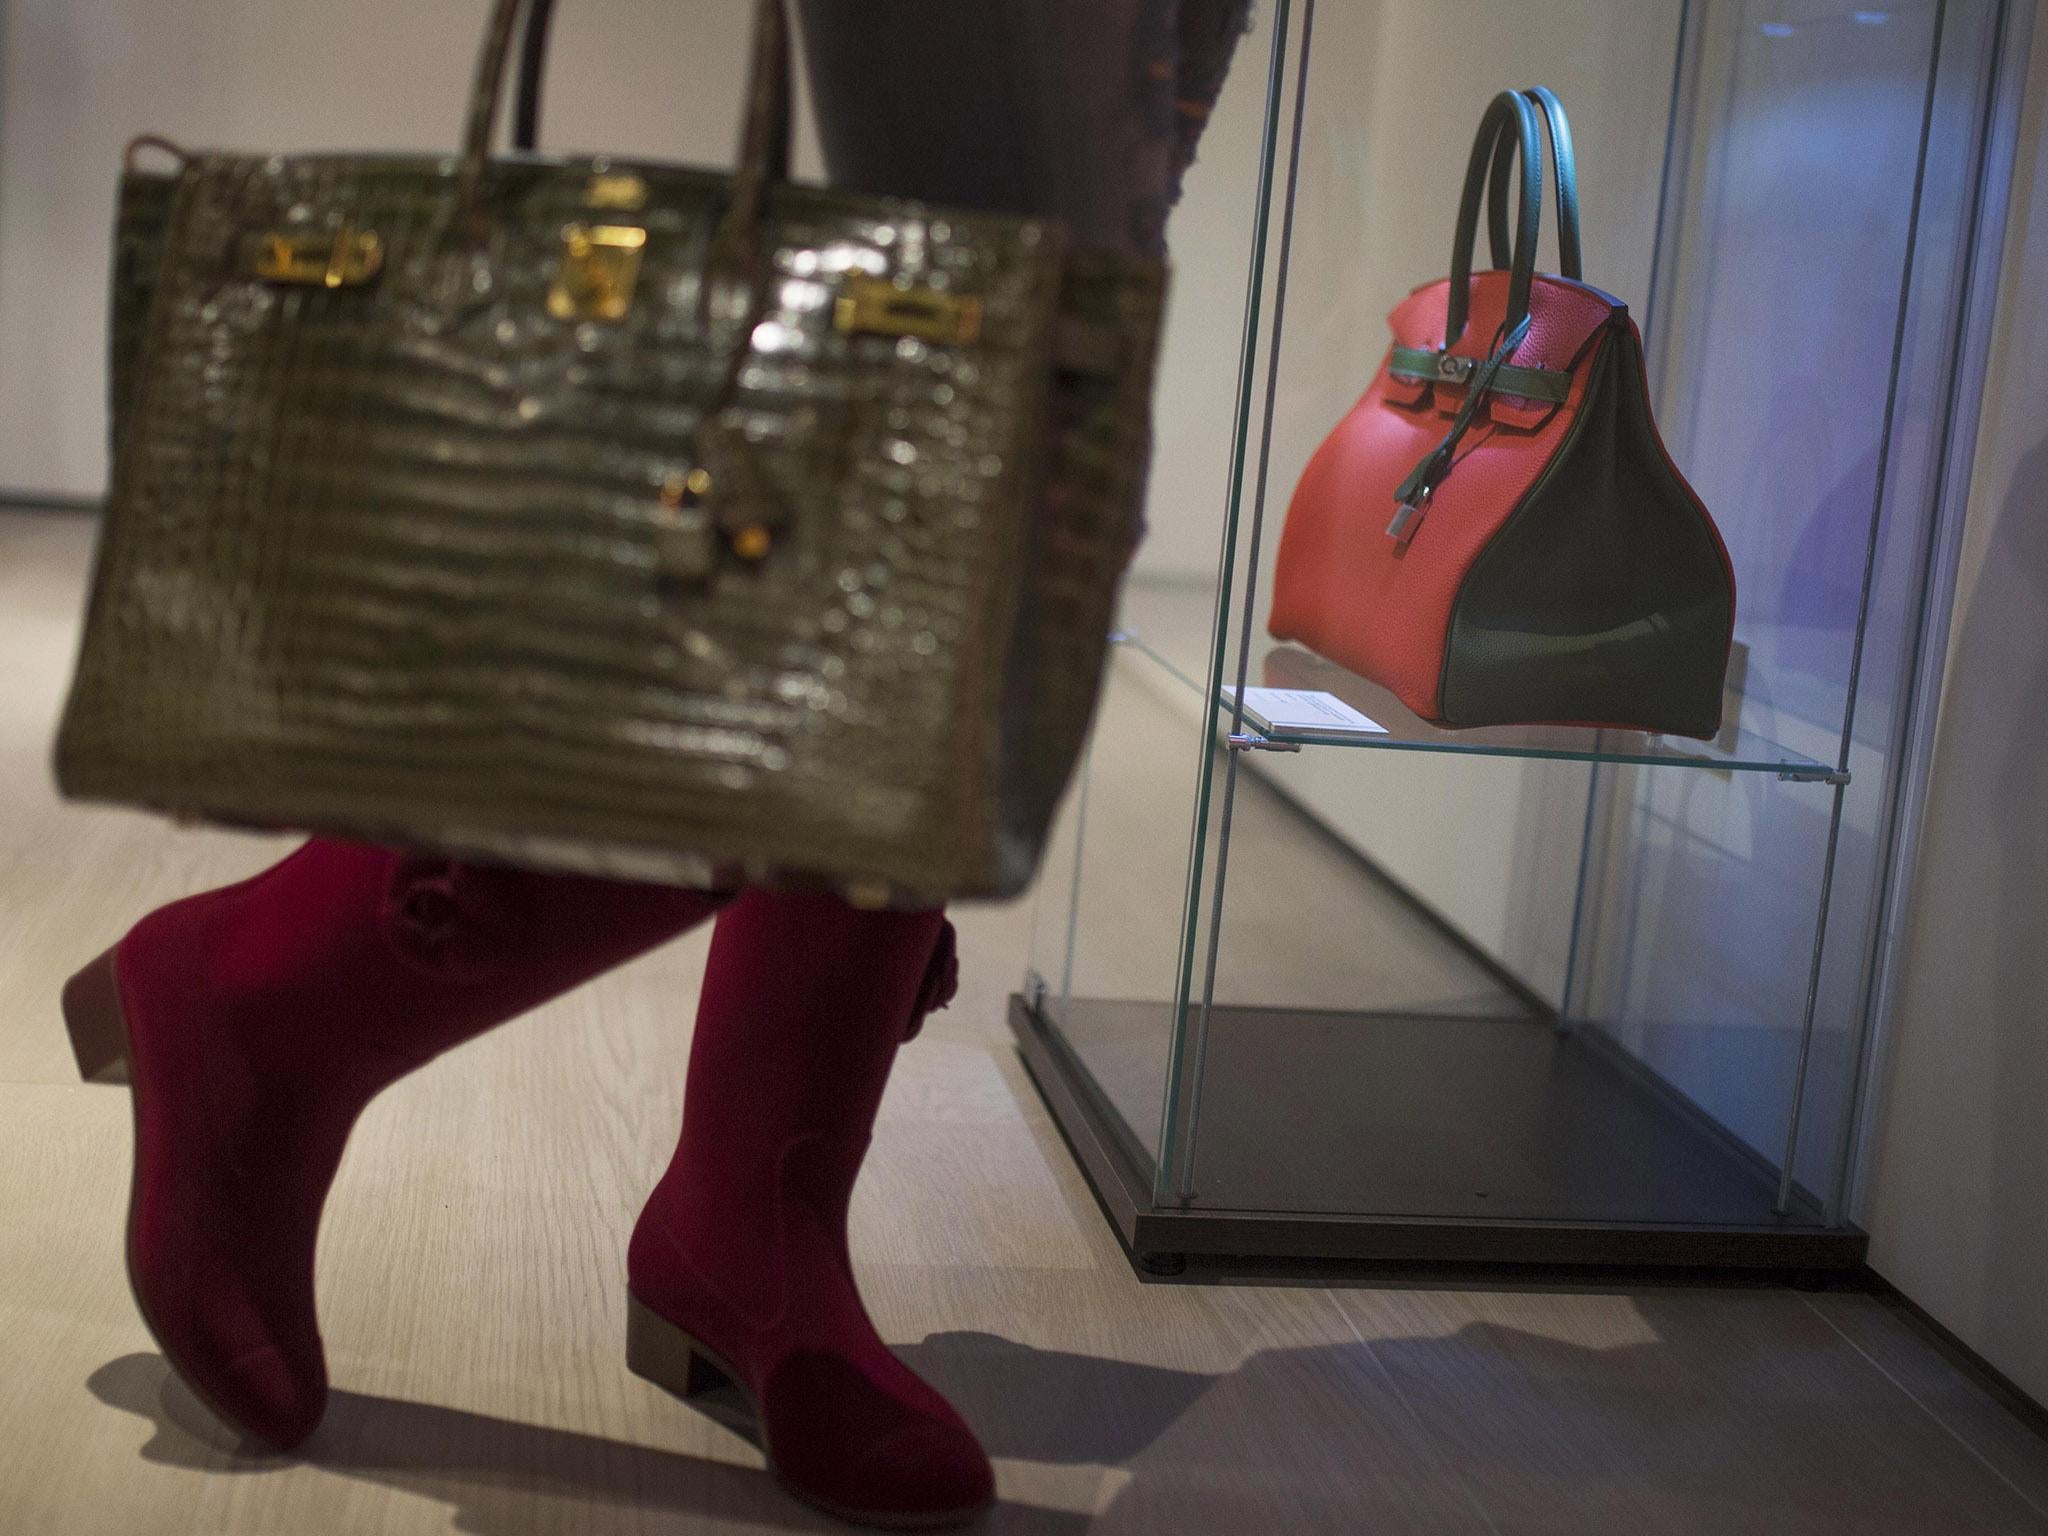 The Next Best Thing To A Birkin? Meet The $35 Handbag With A Three